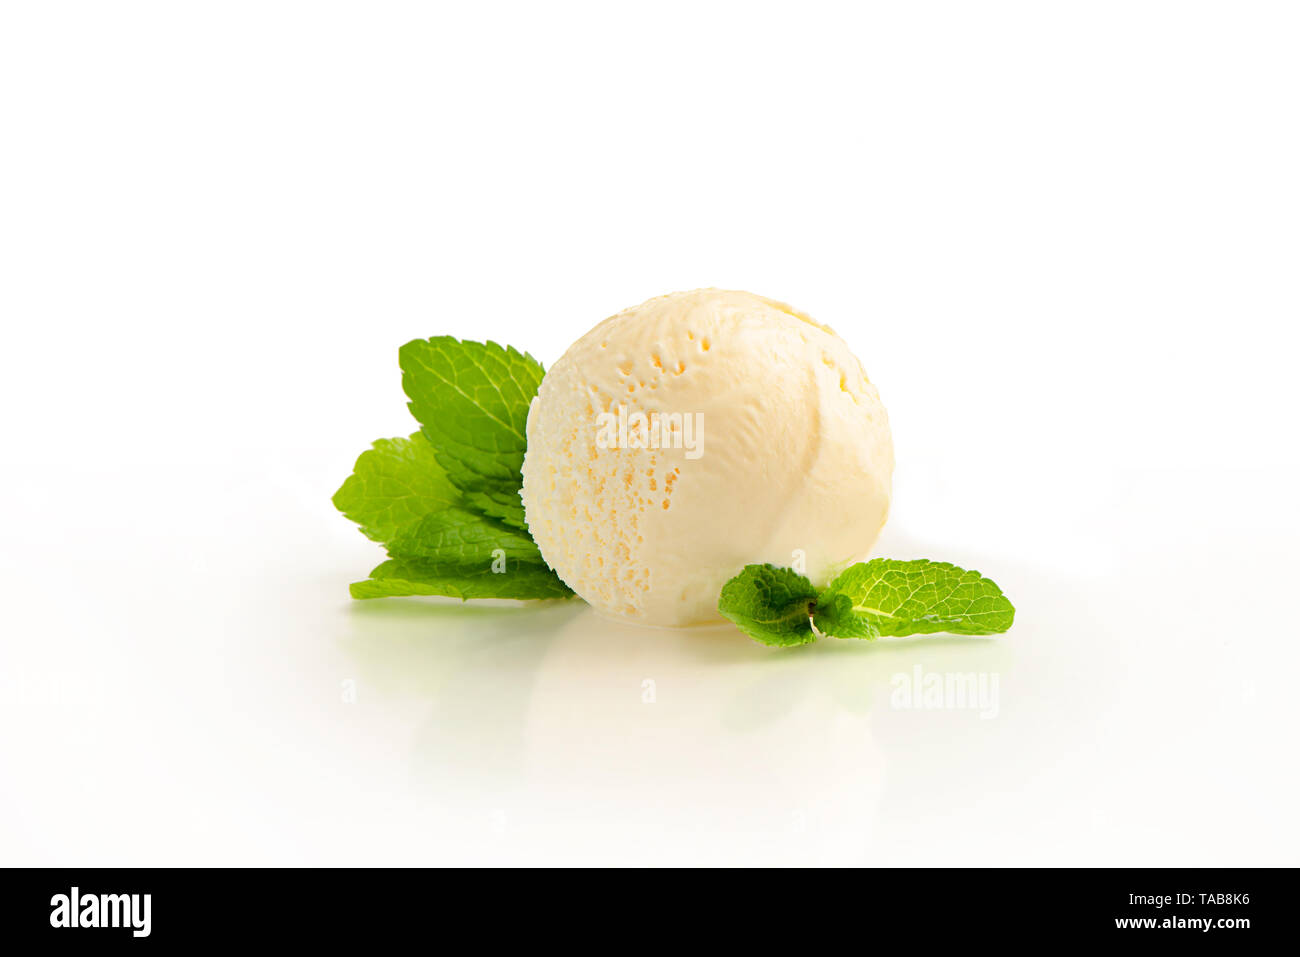 Ice cream ball, mint flavor with ingredients, isolated on a white background. Stock Photo